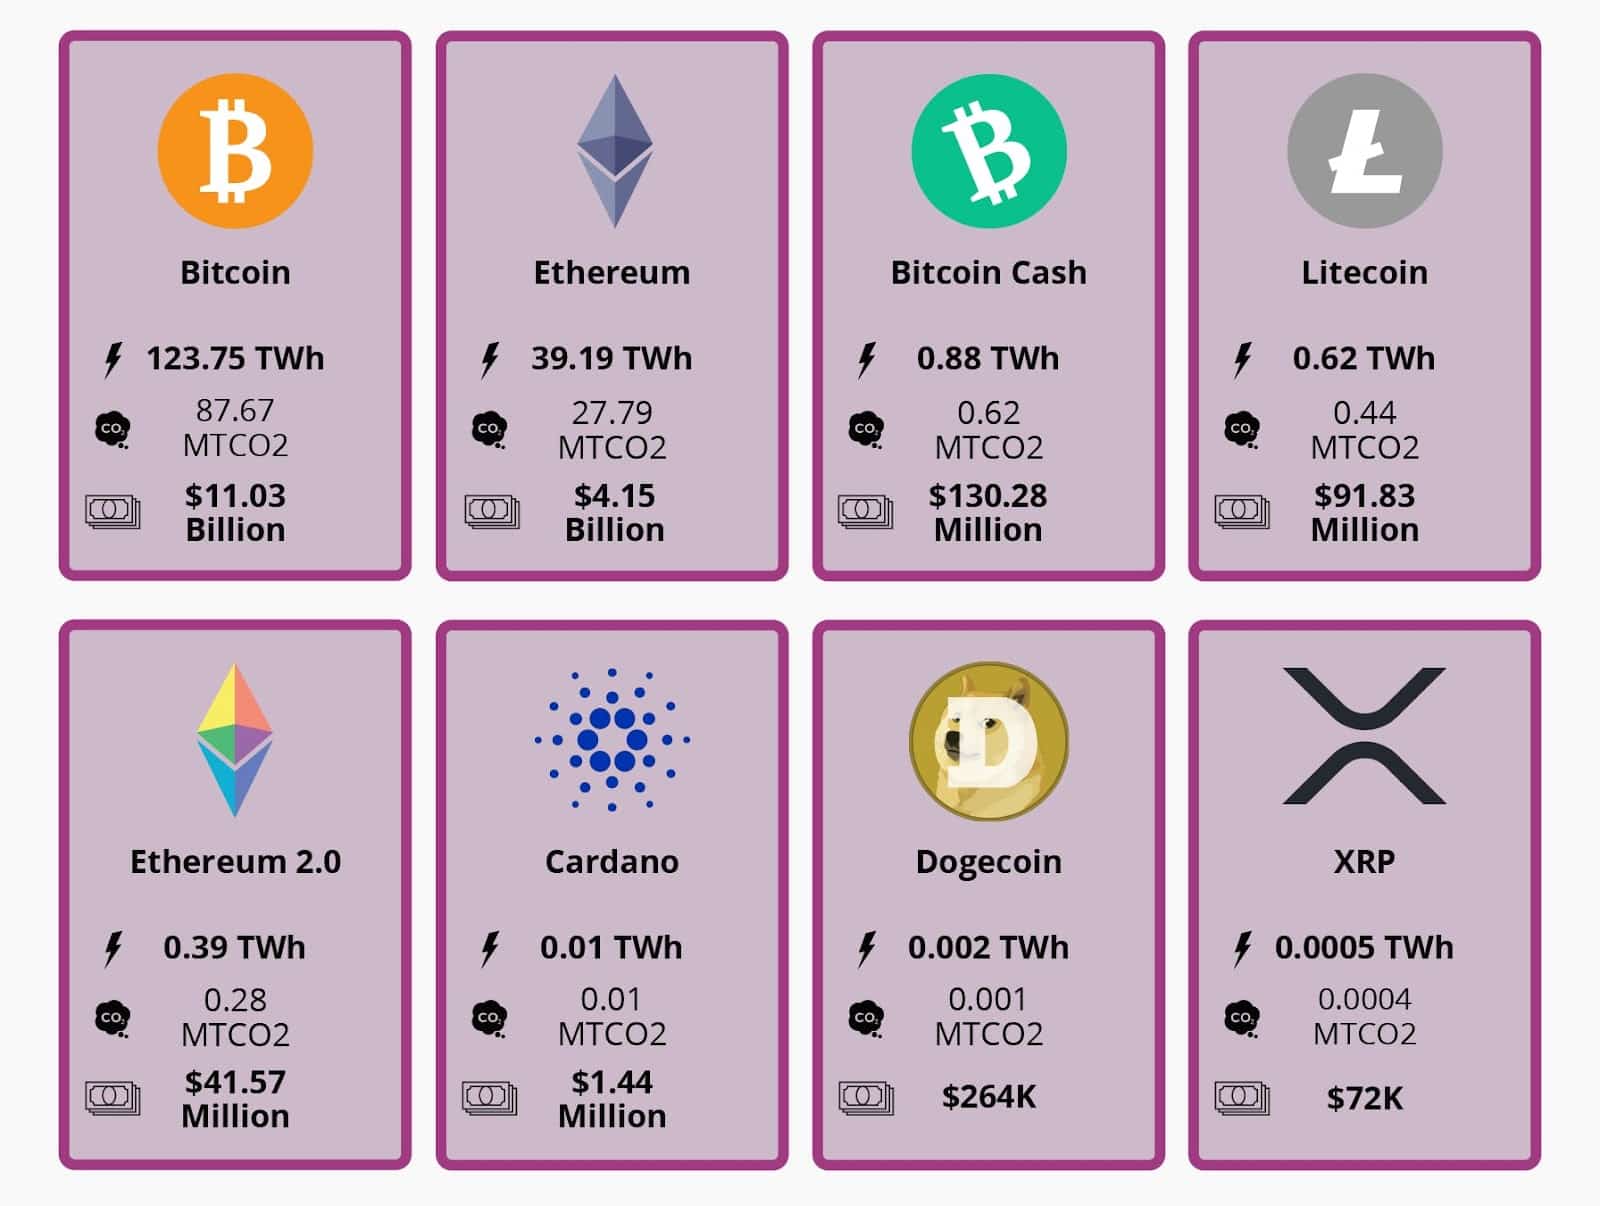 energy used on cryptocurrency mining each year